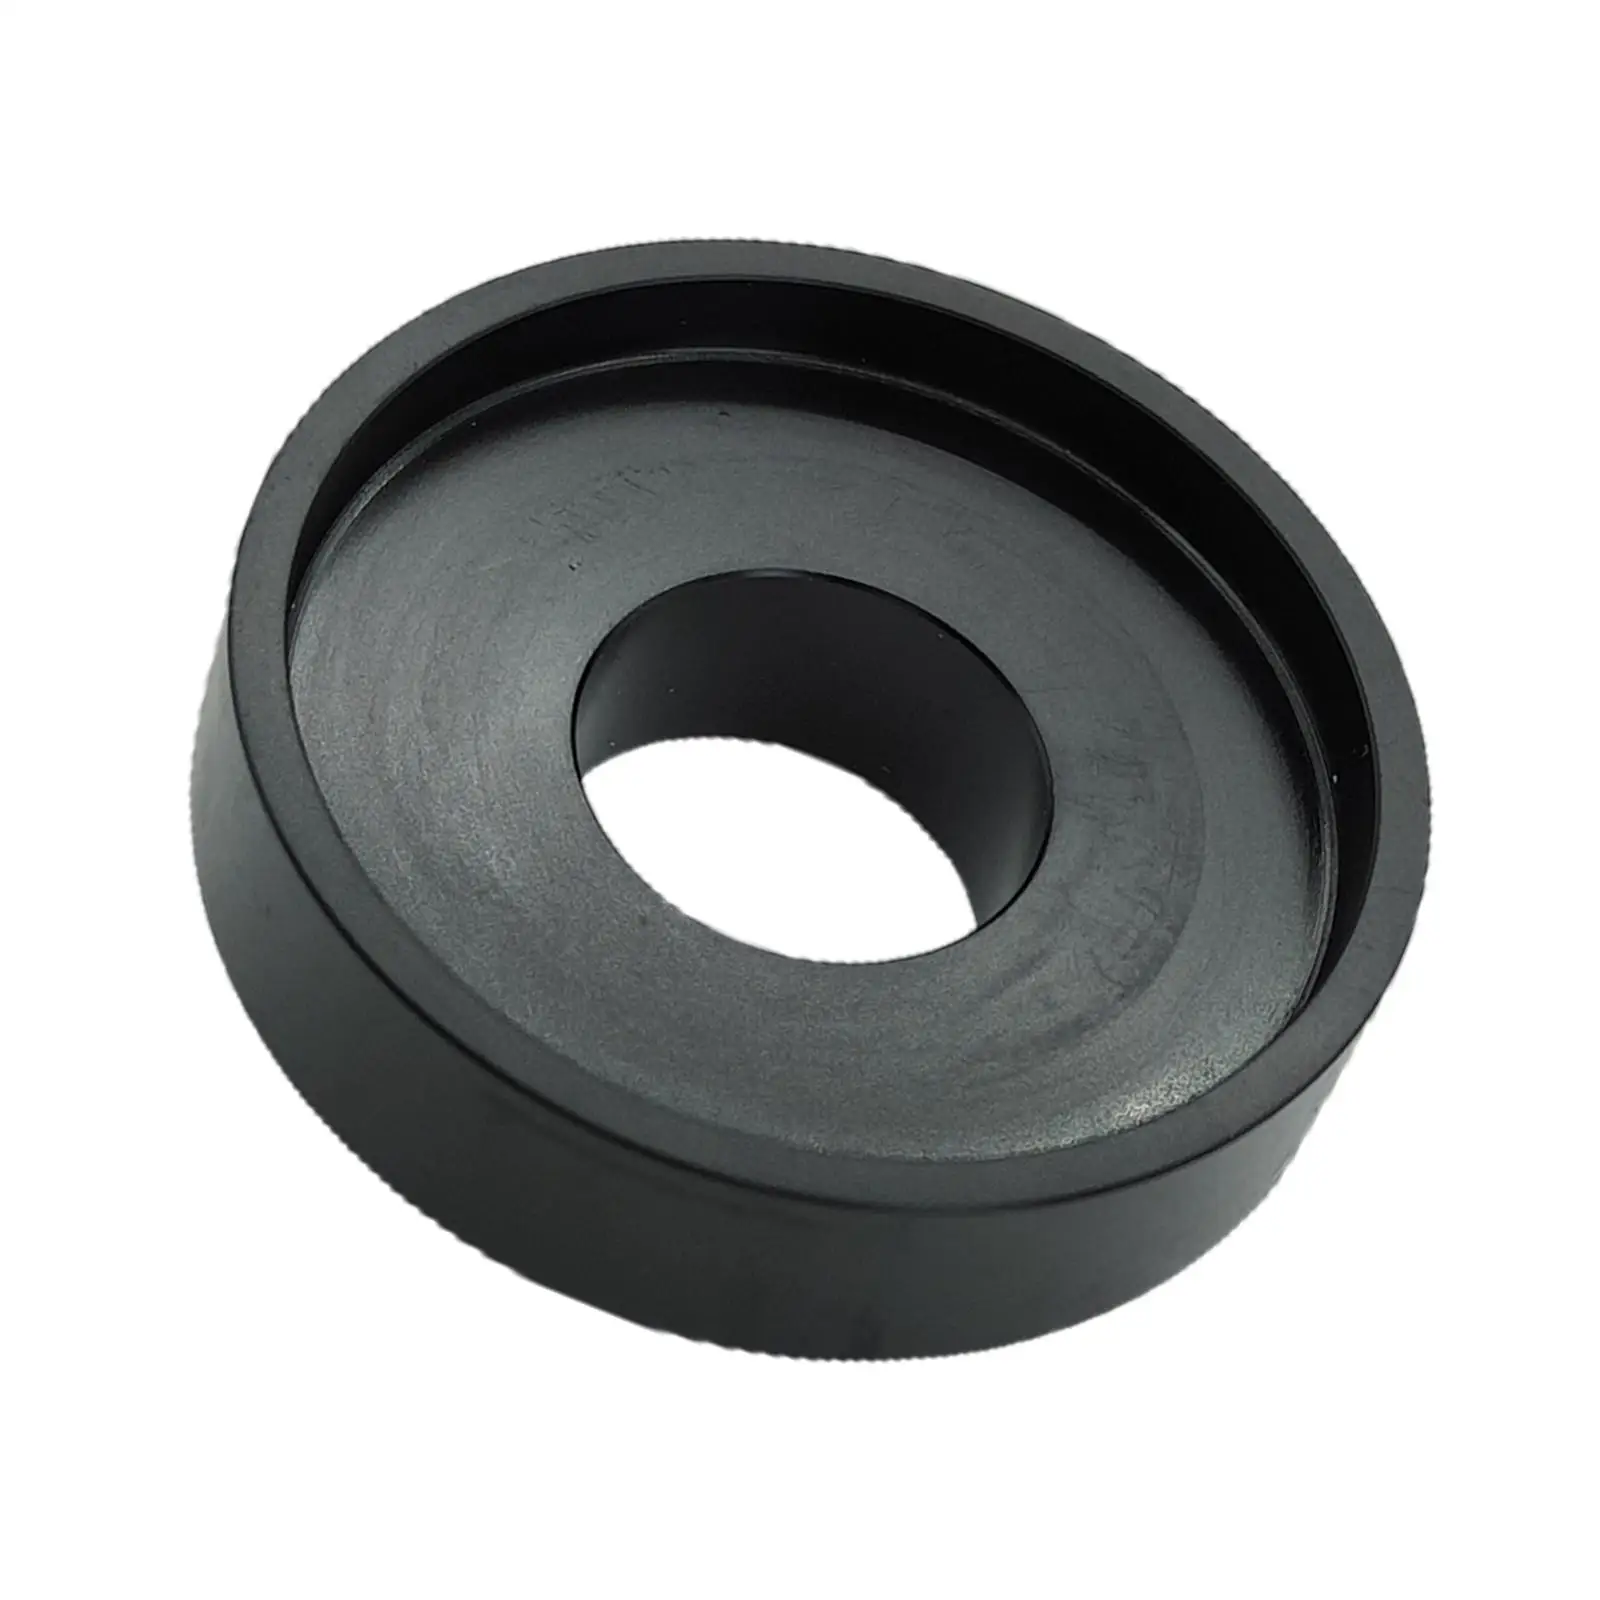 Interior Car Axle Bushing, Easy Installation Replacement for Yj TJ XJ